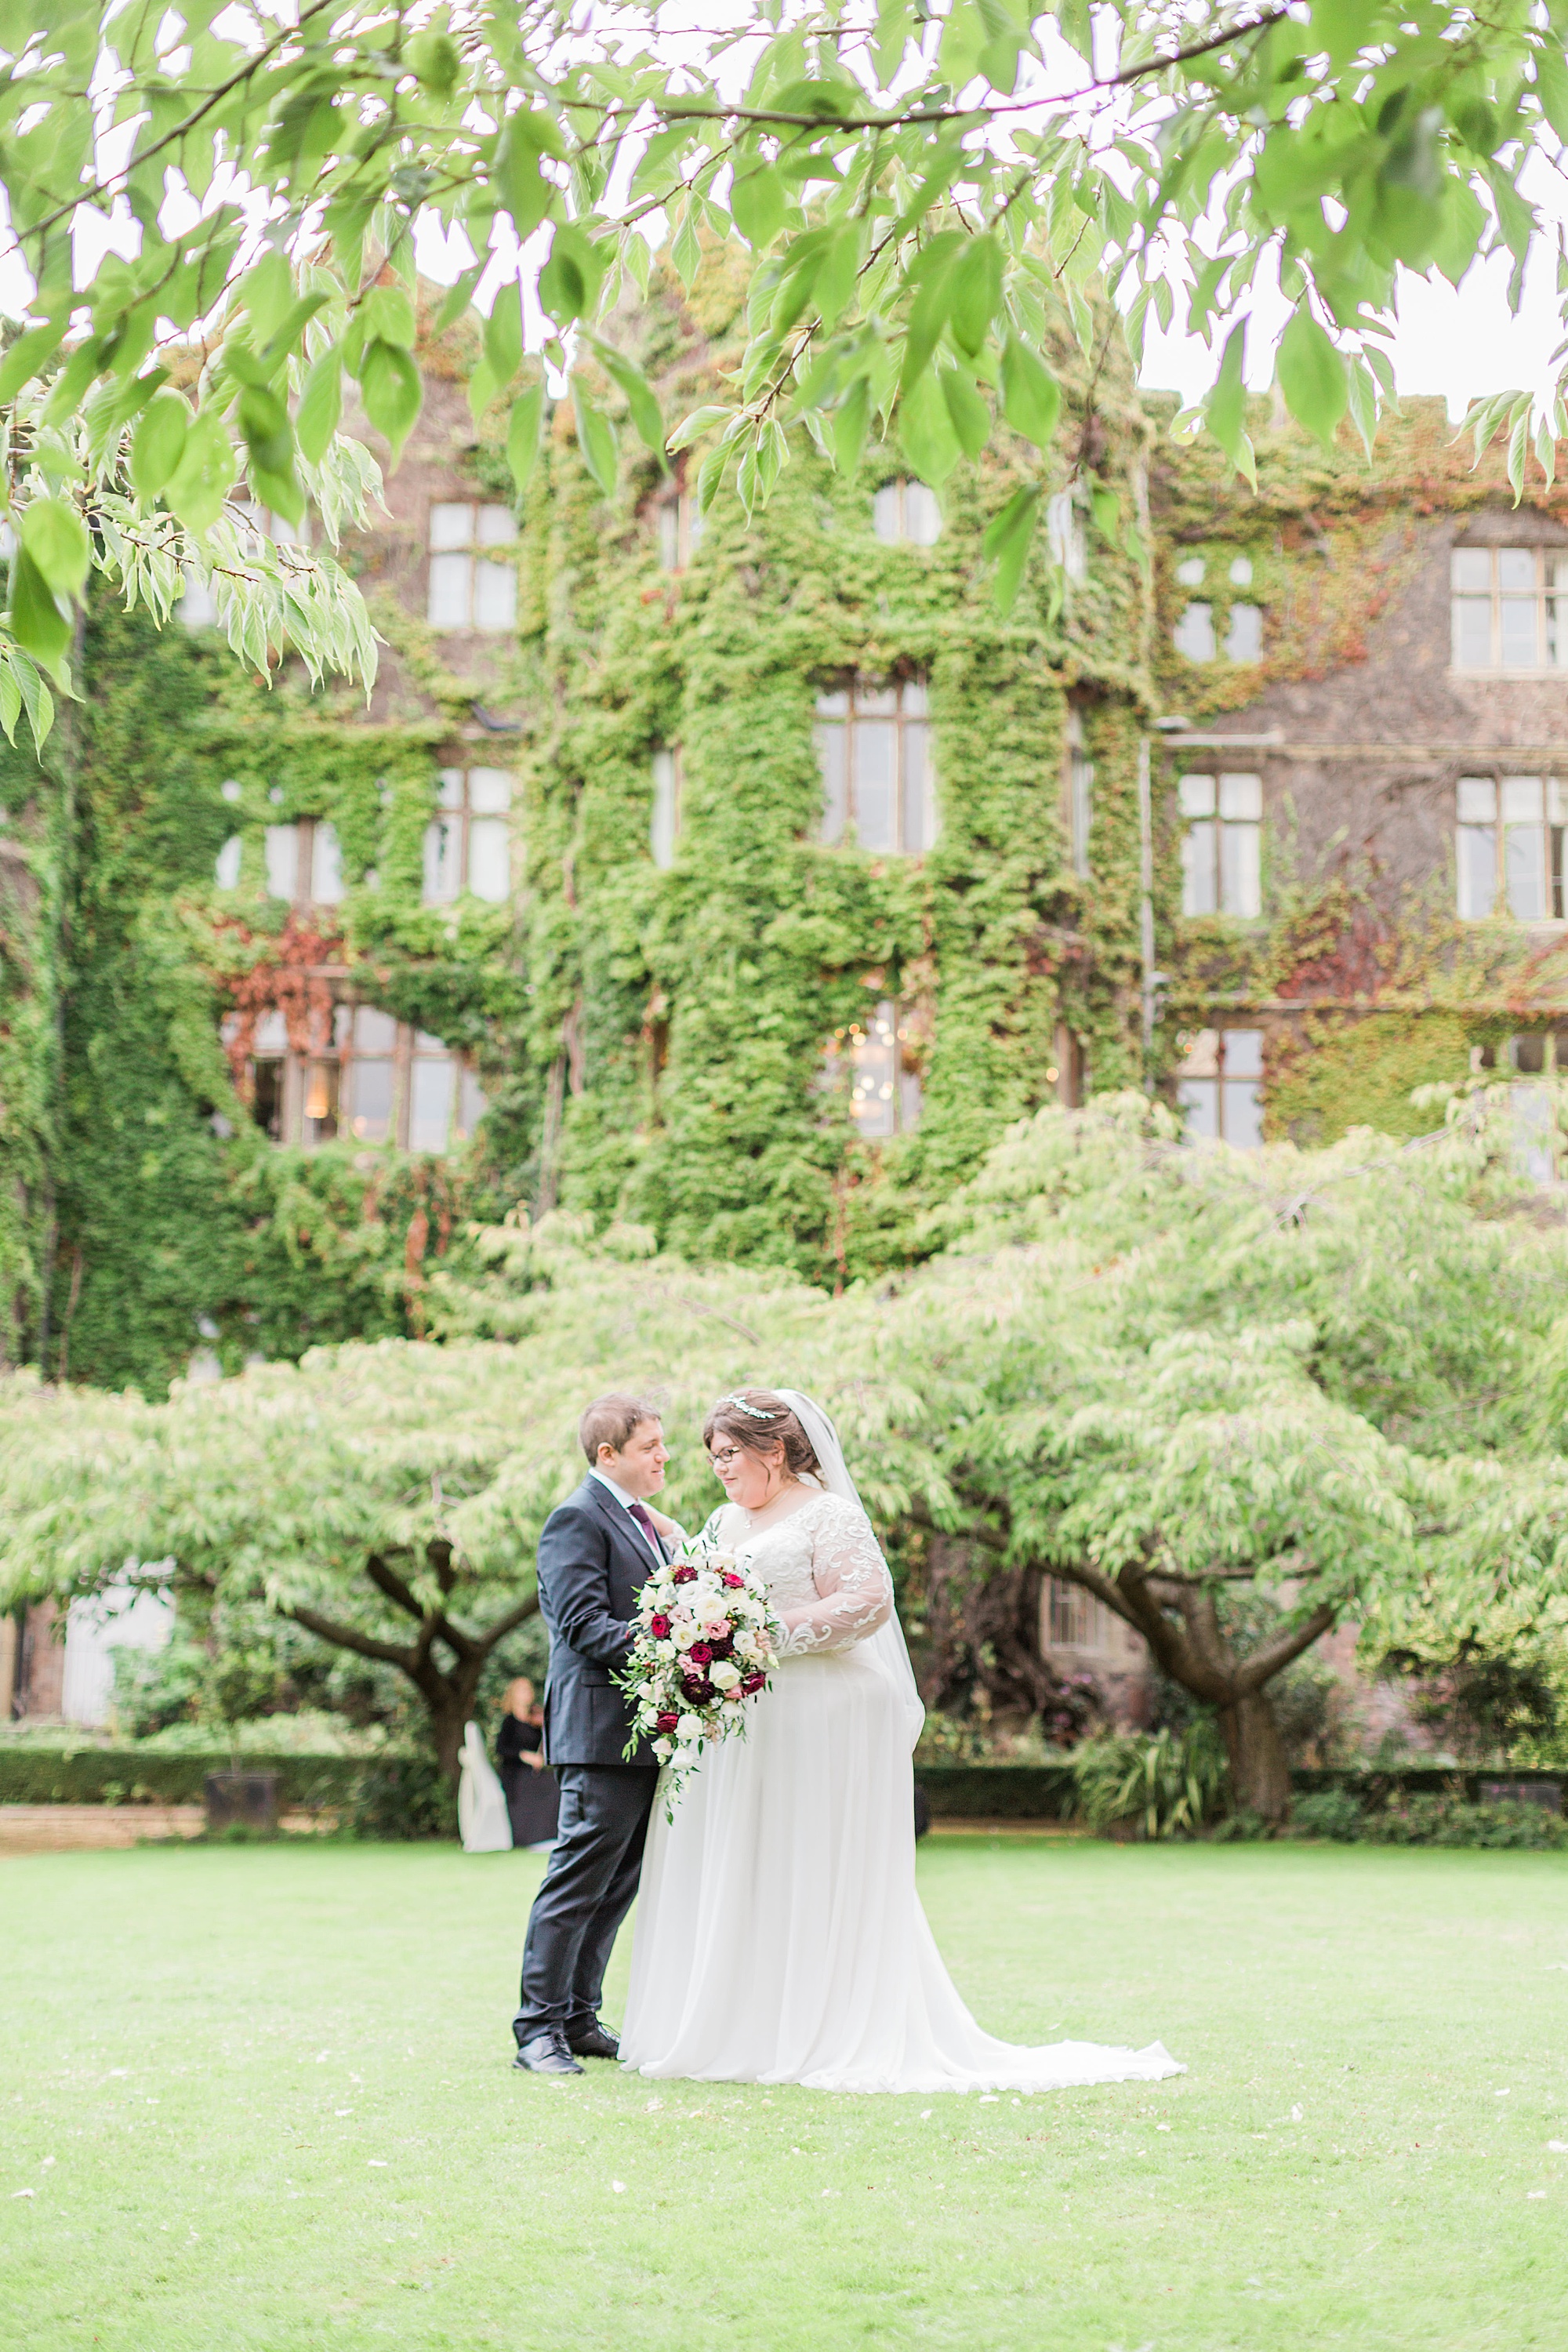 photo of a bride and groom in the grounds of the abbey hotel in malvern, with the abbey hotel behind them, the couple are stood together with trees also behind them